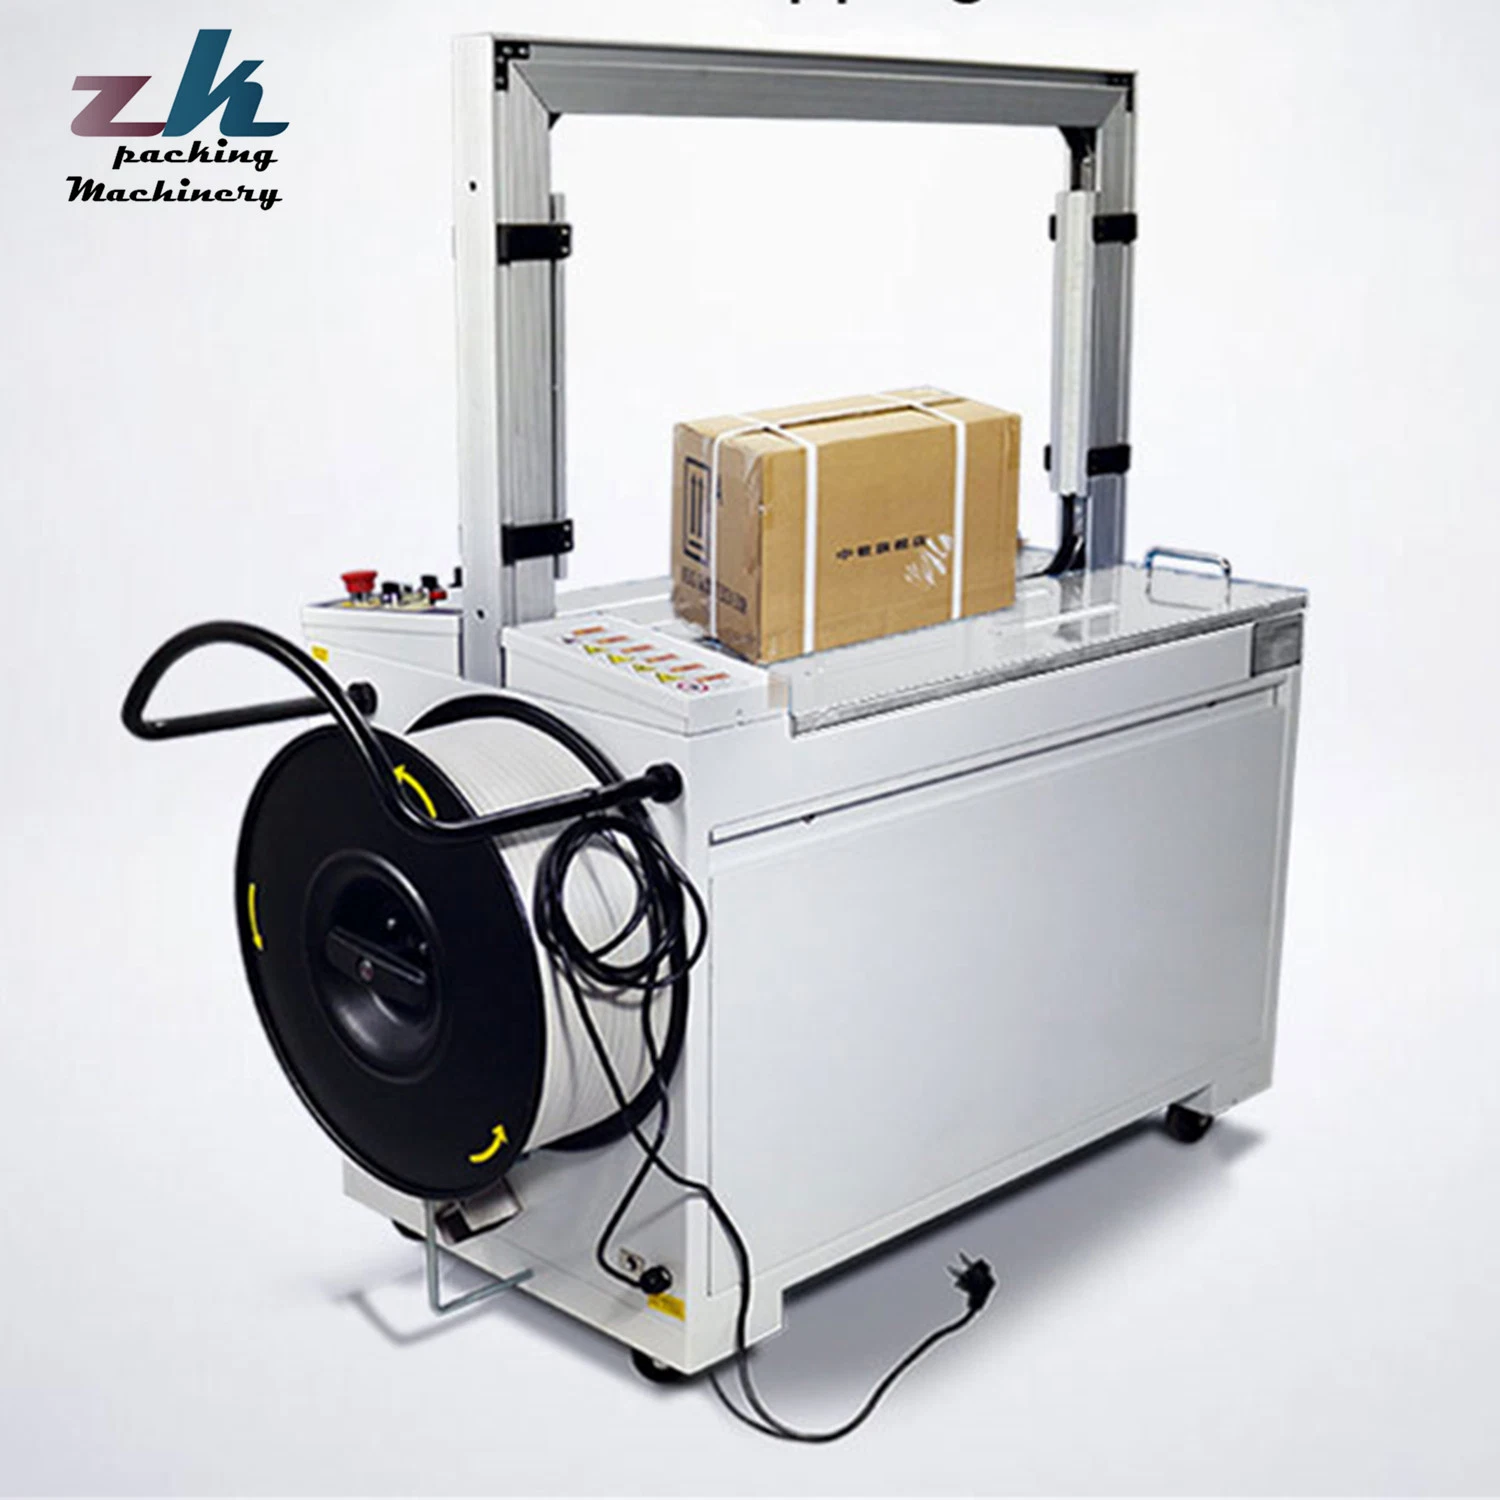 China Products/Suppliers. Automatic PP Tape Carton/Case /Box Strapper/Strap/Strapping Machine with Erecting Sealing Labelling Palletizing System for Packing /PA